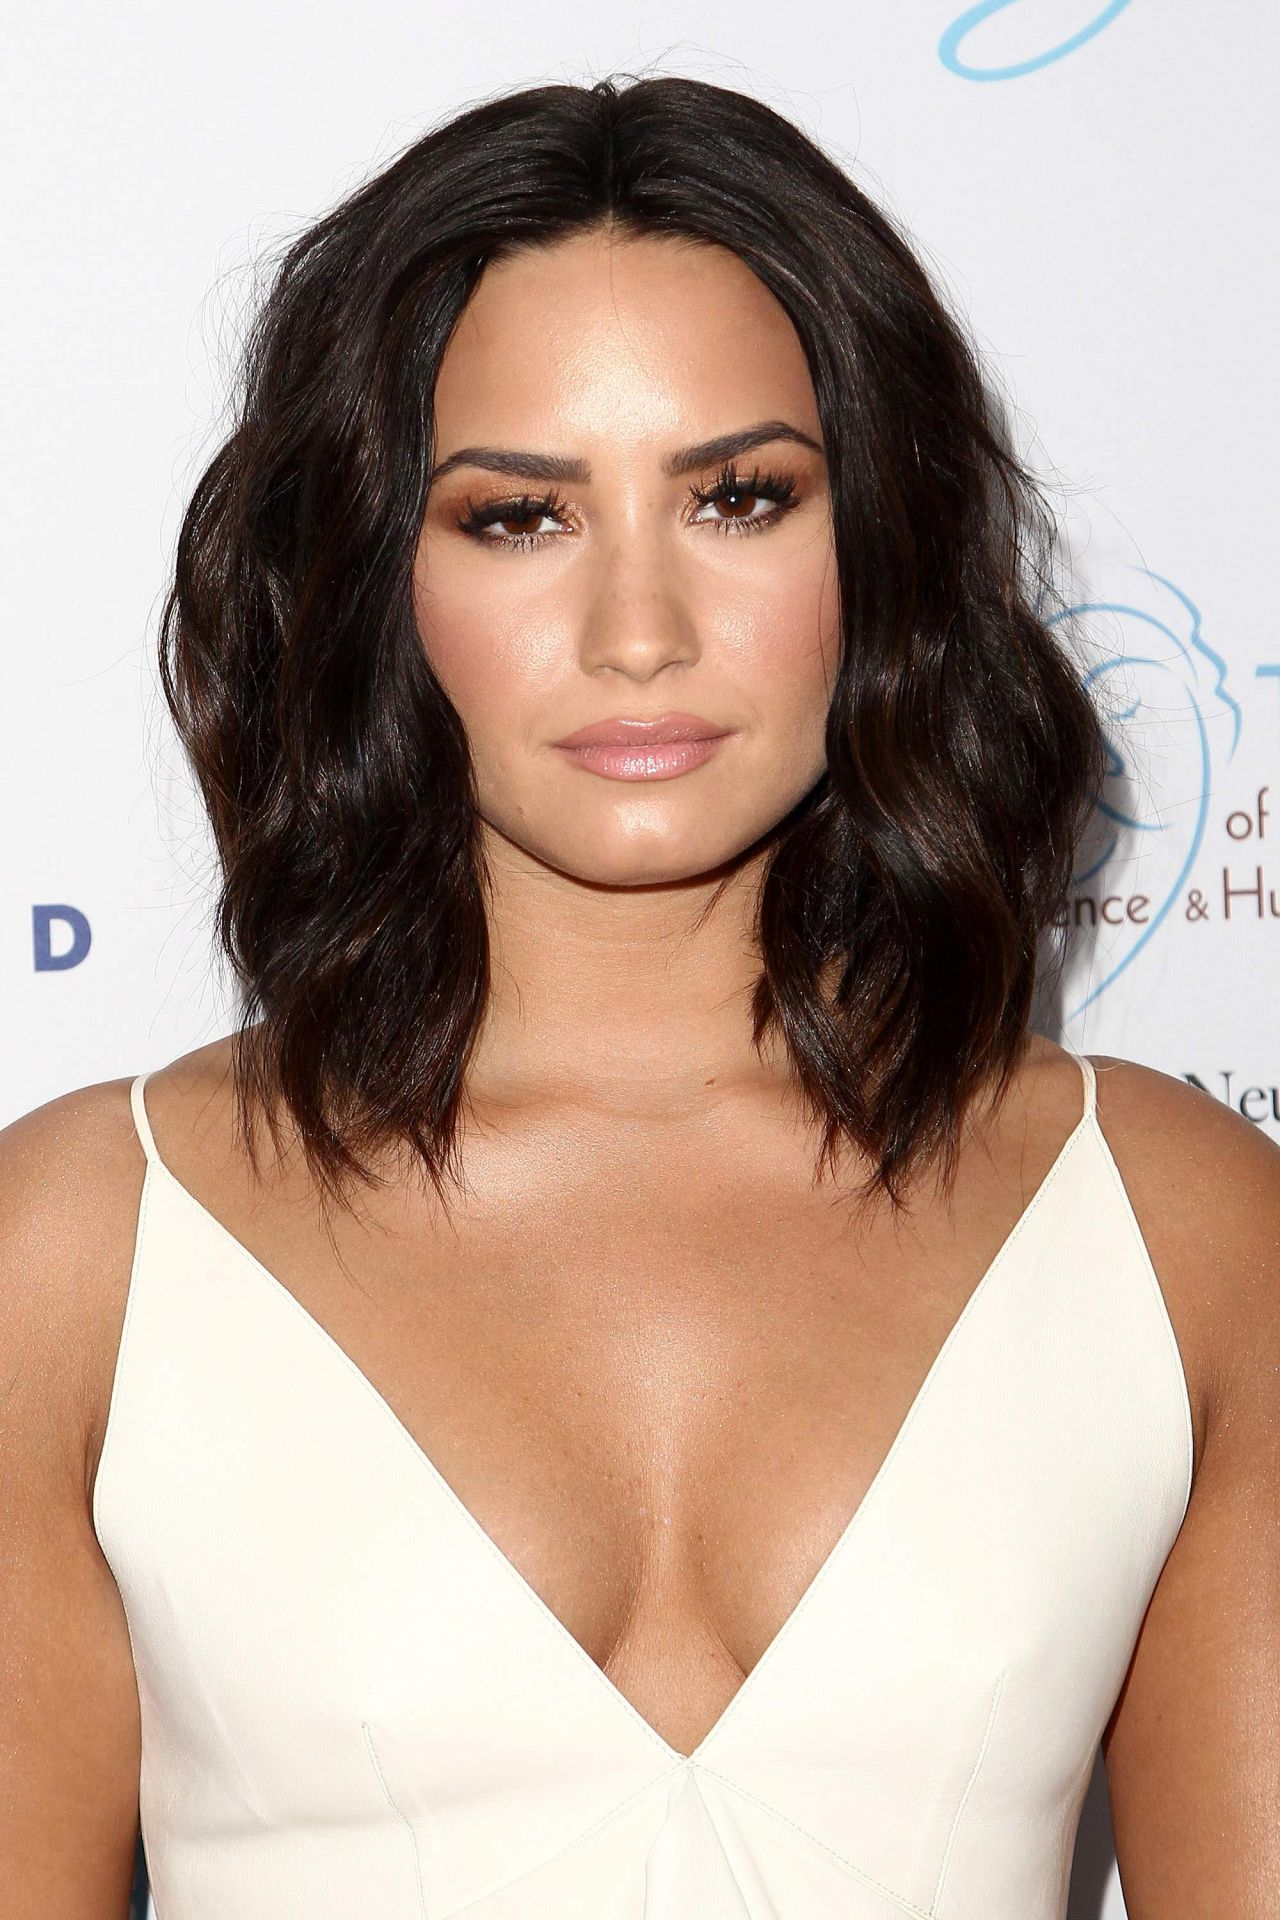 Who Is Demi Lovato Dating? w/ Noah Cyrus? Current Status, Relationship History, Timeline And More